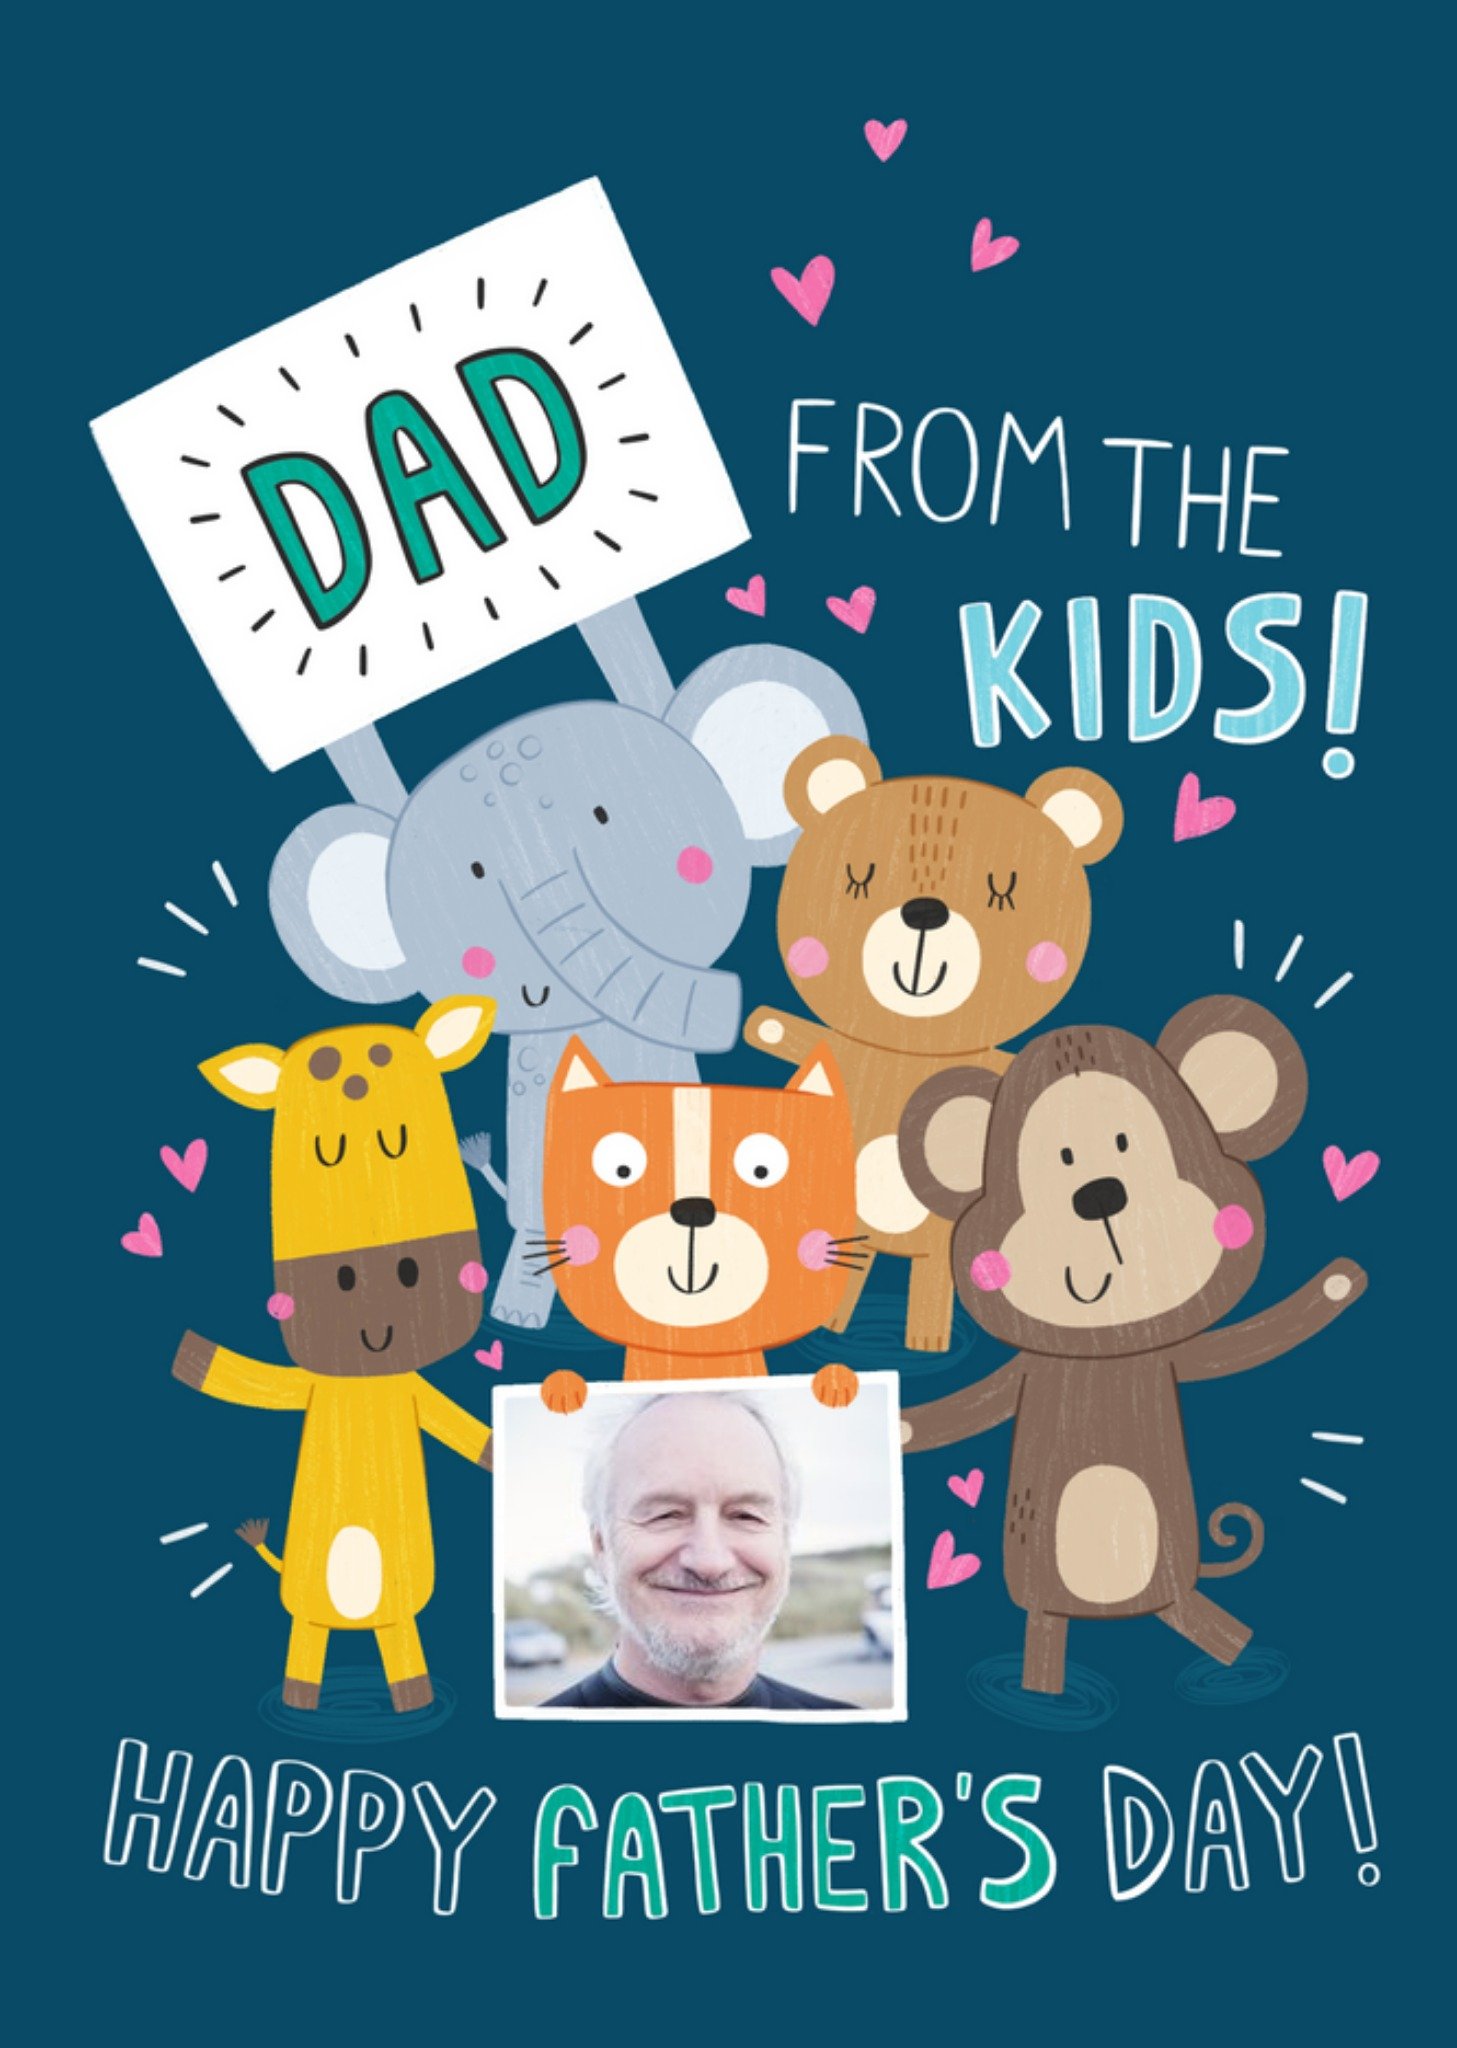 Moonpig Cute Illustrations Animals Dad From The Kids Happy Fathers Day, Large Card